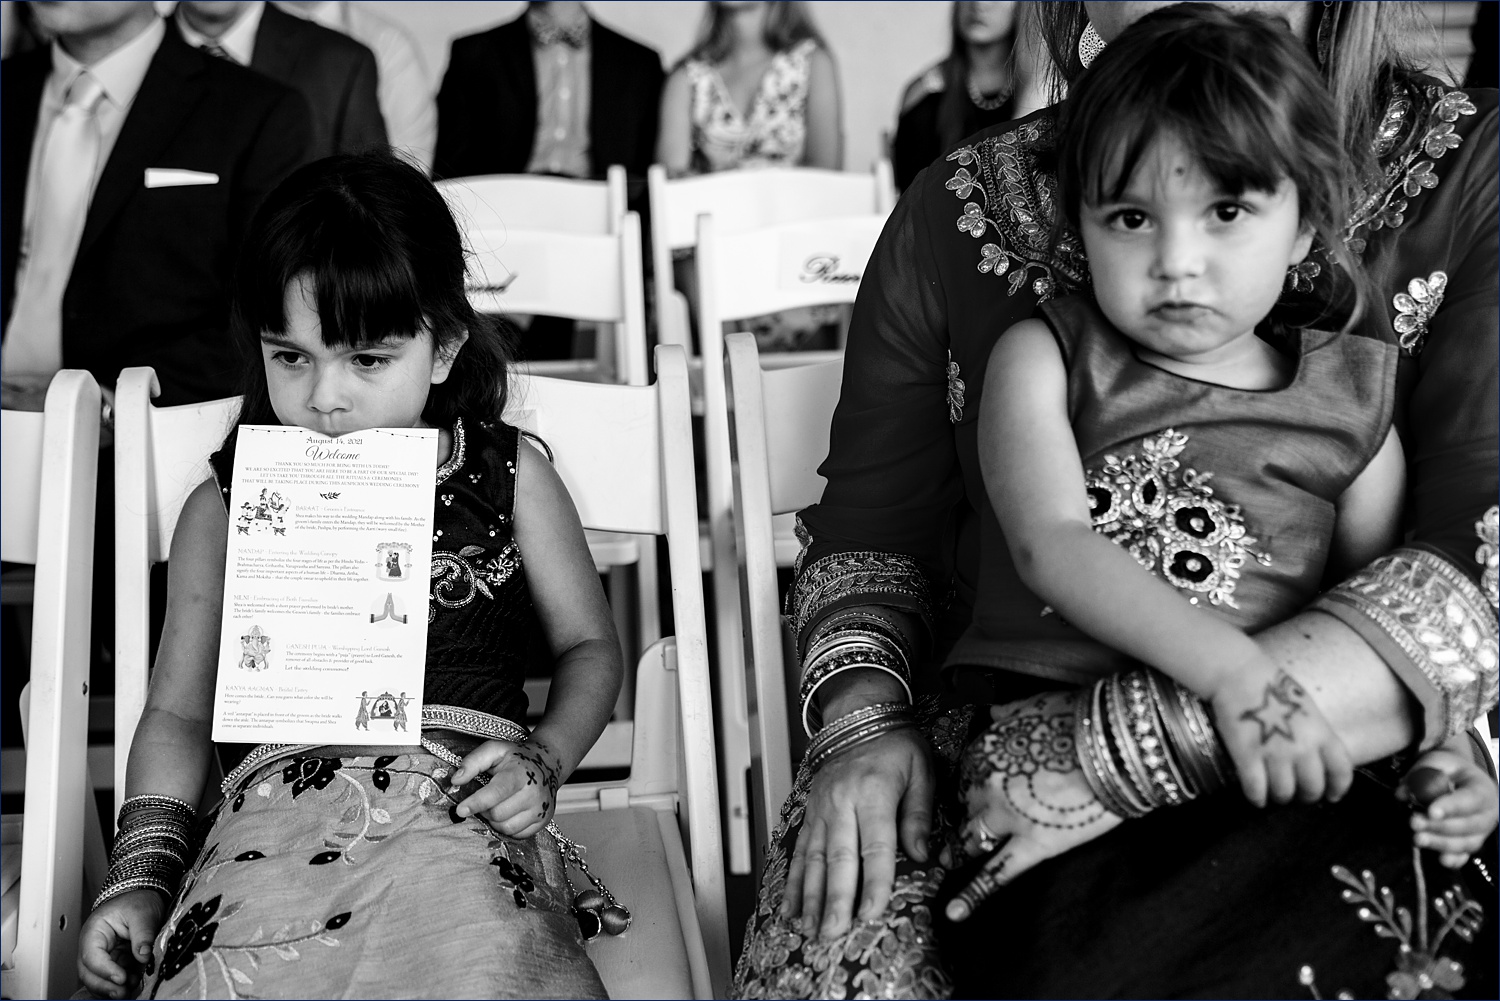 Two little ones patiently watch the wedding ceremony